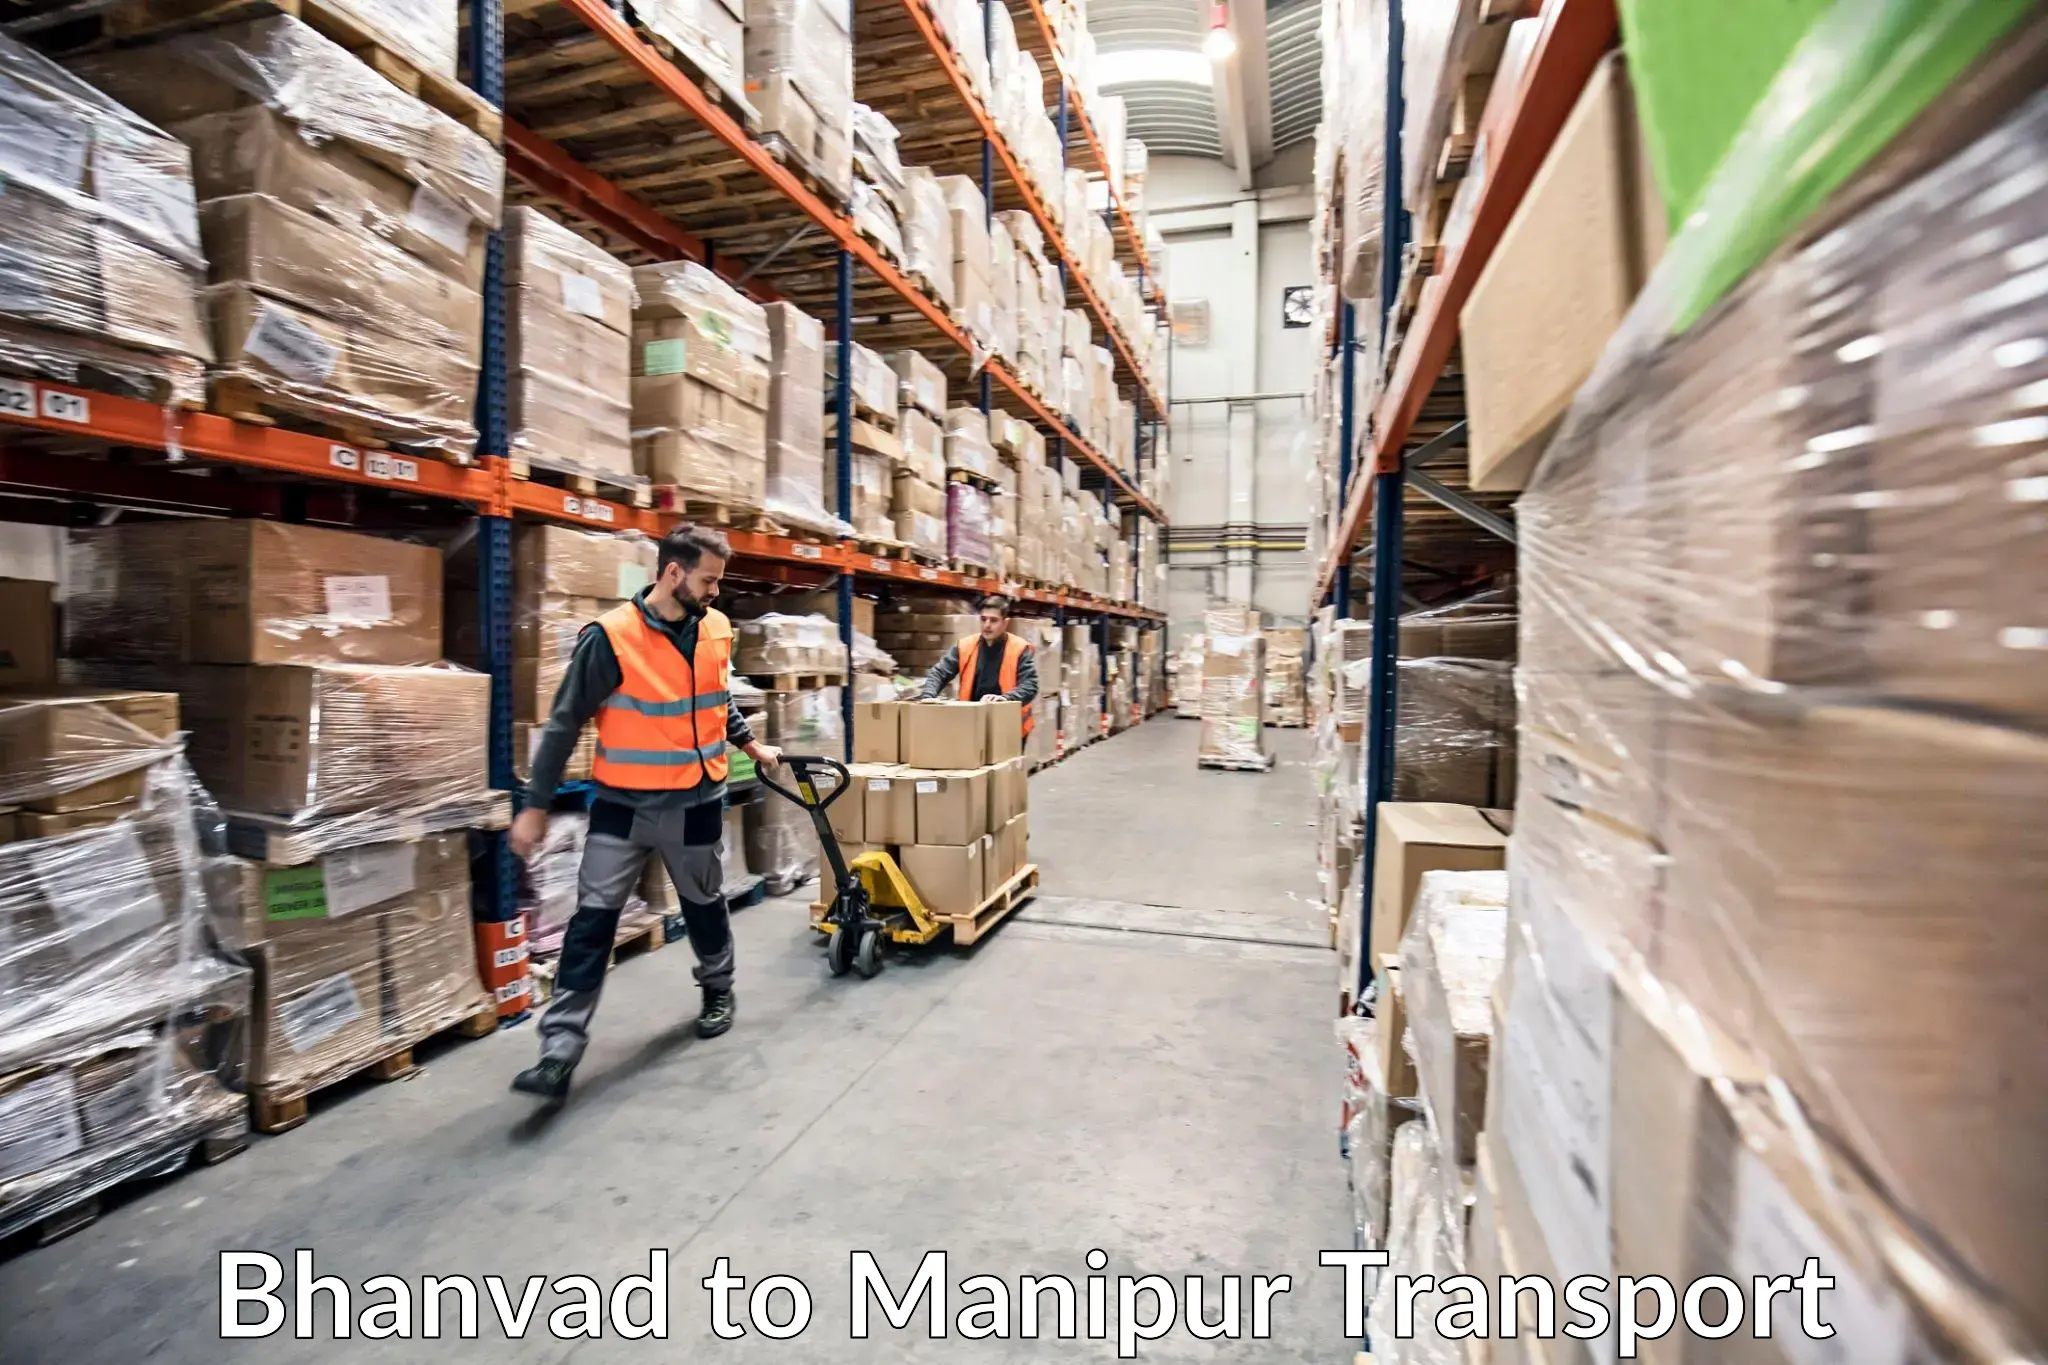 Shipping partner Bhanvad to Manipur